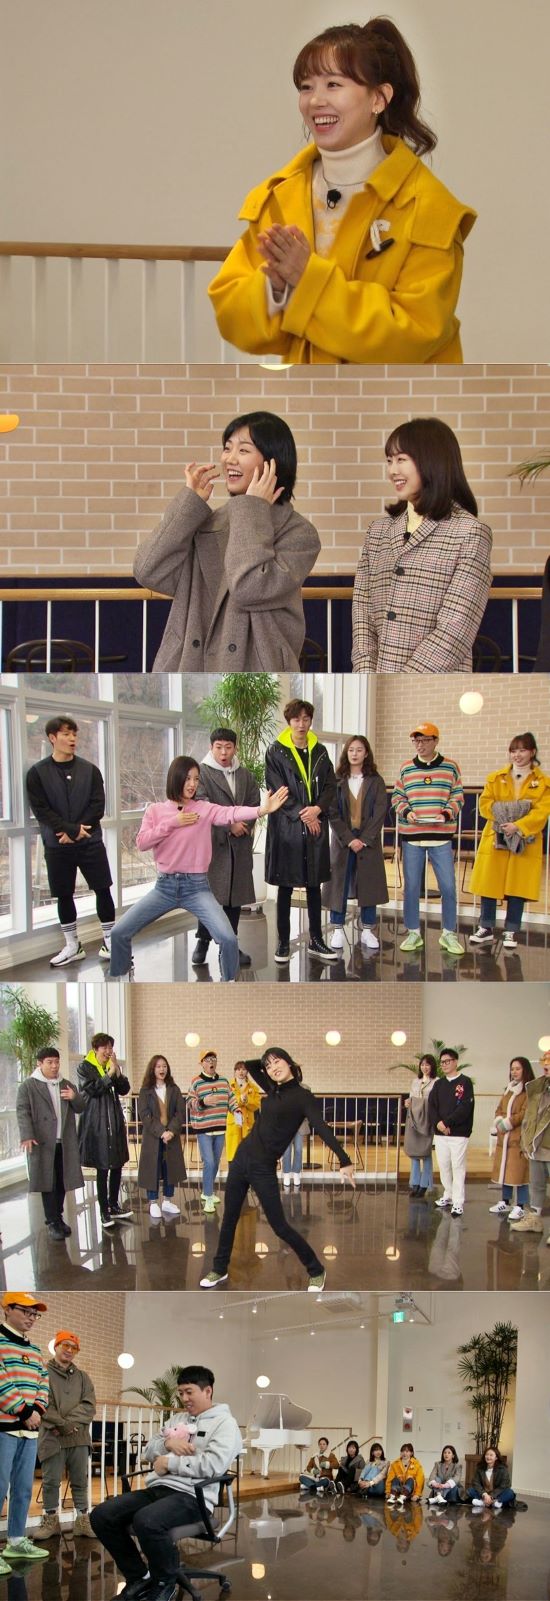 Actor Kang Han-Na, Keum Sae-rok, Park Cho-rong and Lee Ju-young appear in Running Man.On SBSs Running Man, which will be broadcast on the 19th, a thrilling explosion called Race will be broadcast.In the recent Running Man recording, Kang Han-Na, Keum Sae-rok, Park Cho-rong and Lee Ju-young, who are expected to be more active in 2020, appeared and showed fresh charm from the opening.Keum Sae-rok said, I did not play much more because I did not have any friends at the time of the first appearance of Running Man. I want to be with a close person in this second appearance.Actor Lee Ju-young, who appeared together in Dokjeon and became a best friend, appeared together. Keum Sae-rok showed Lee Ju-young and his extraordinary best friend Kimi.Lee Ju-young, who appeared in Running Man on the recommendation of Keum Sae-rok, foresaw the role of Running Man as a nickname of SteelSeries in the movie.I am working hard on the sudden dance demands of the members, but I am somewhat clumsy and get a response saying, Is not the wooden doll dancing?After the 9th anniversary fan meeting of Running Man, A Pink Park Cho-rong, who first met with members, also revealed the charm of anti-war by revealing his anti-war martial arts skills that he had polished for eight years.In addition, Running Man semi-fixed Kang Han-Na visited Running Man in about two months and led the atmosphere with a rusty entertainment feeling.Running Man will air at 5 p.m. on the 19th./Photo = SBS Running Man